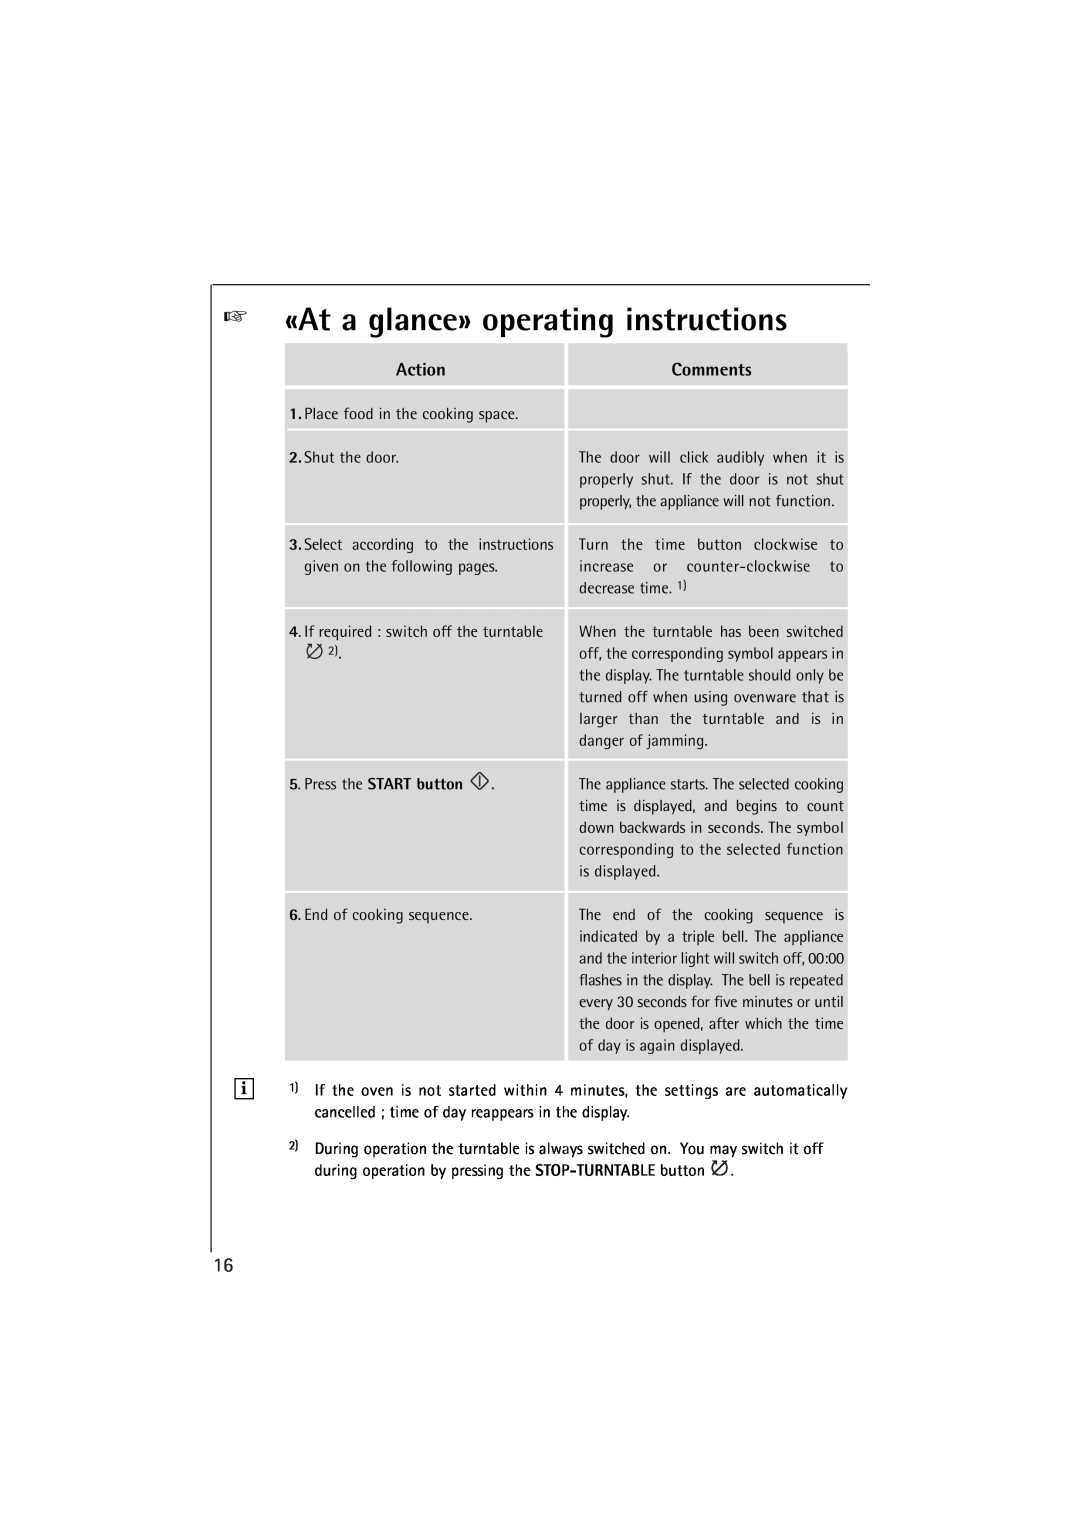 AEG MCC 663 instruction manual «At a glance» operating instructions, Action 